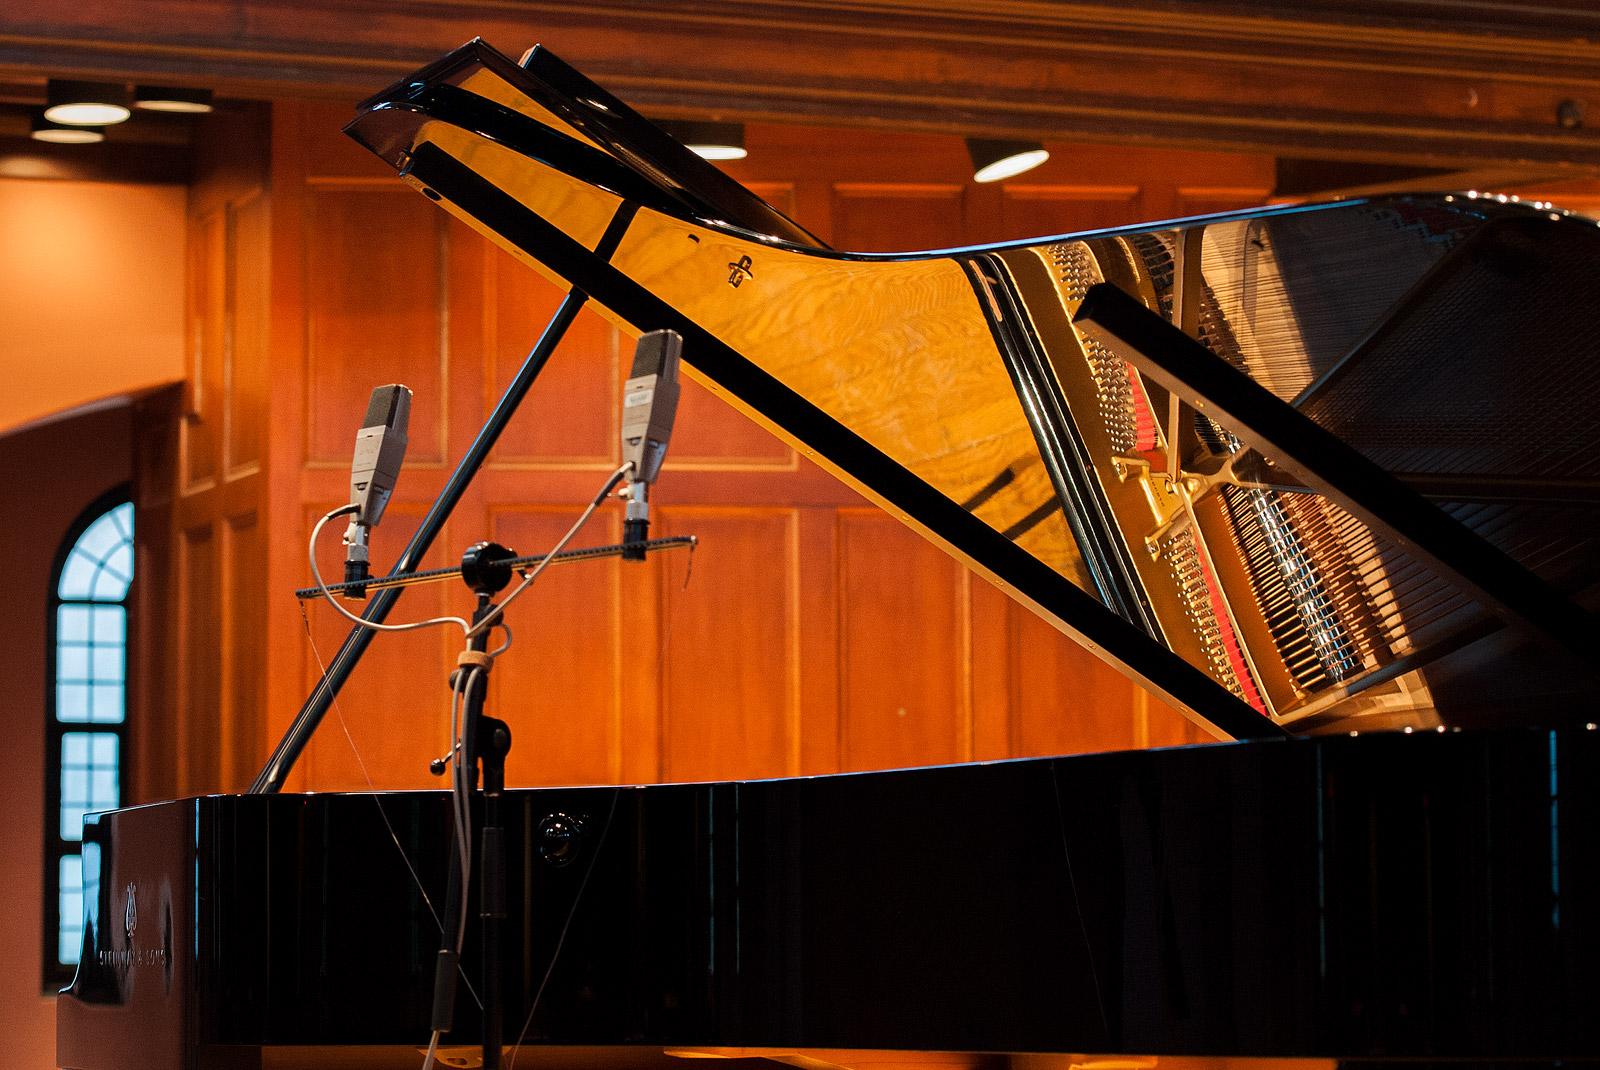 Microphones above a grand piano